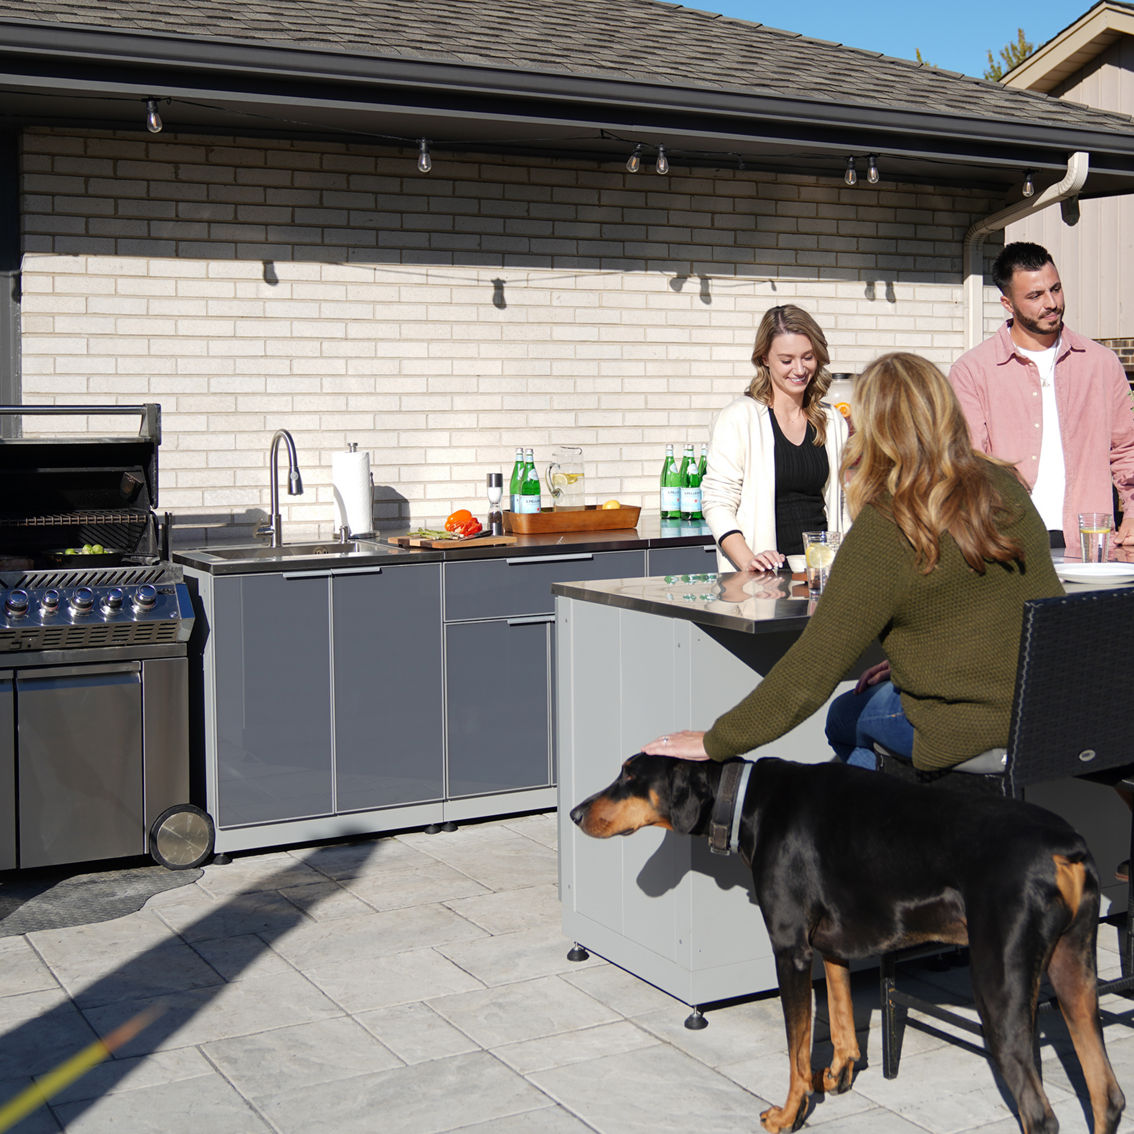 Blue Sky Outdoor Living Double Extended Stainless Steel Countertop - Image 6 of 9